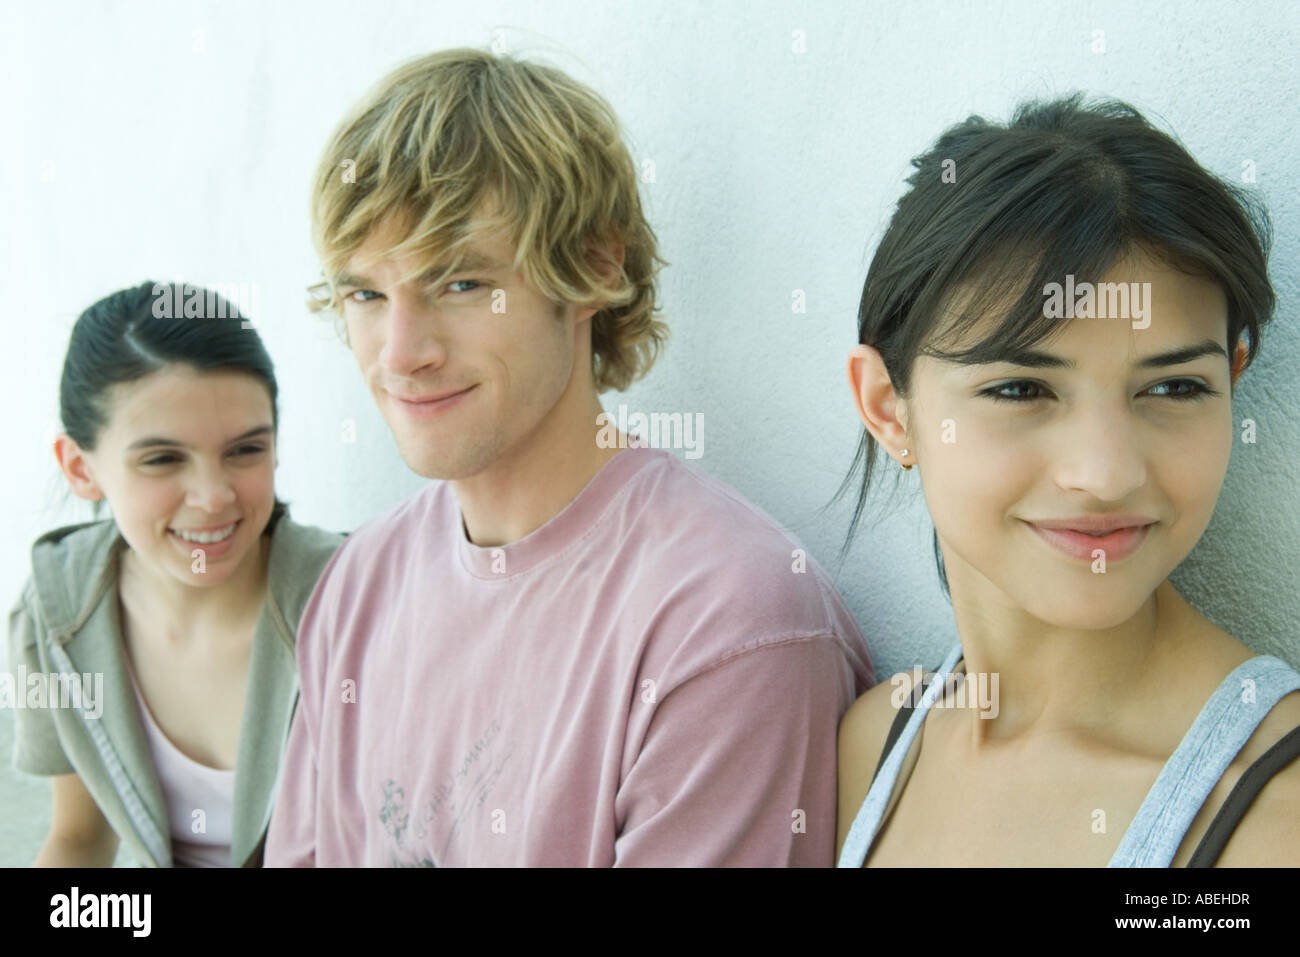 Group of young friends Stock Photo